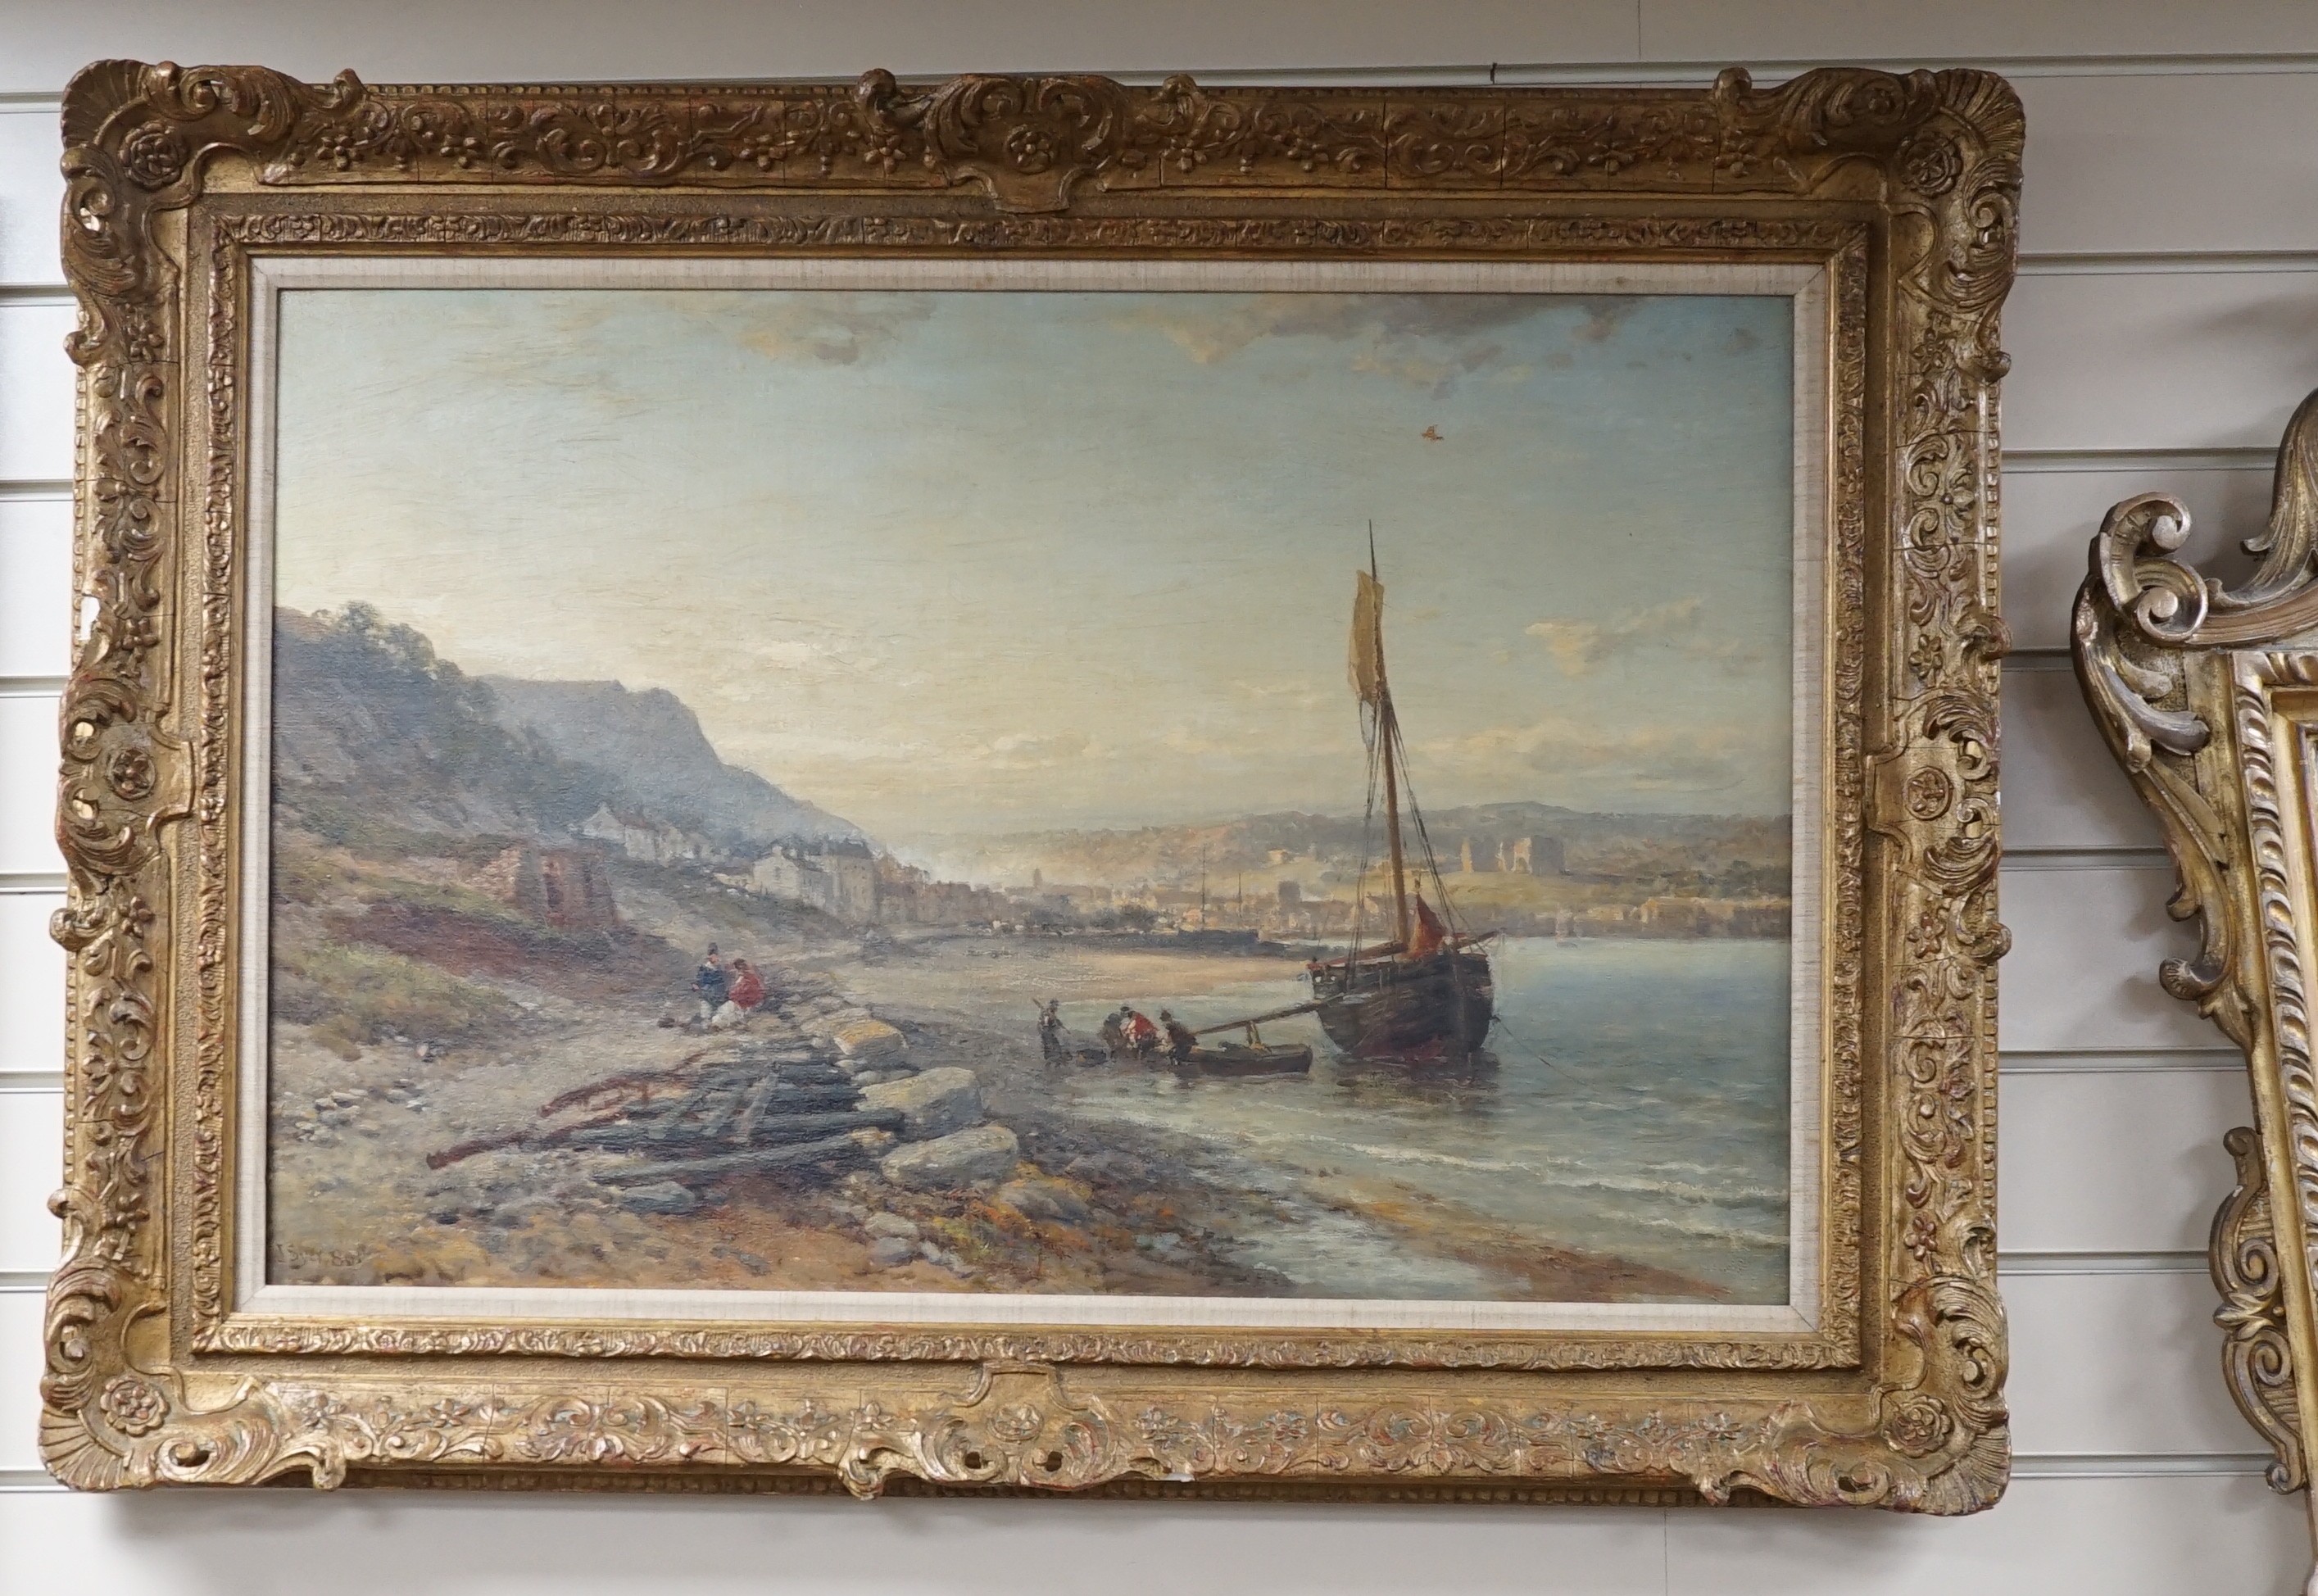 John Syer (1815-1885), oil on canvas, Fisherfolk at low tide, signed and dated '80, 50 x 75cm